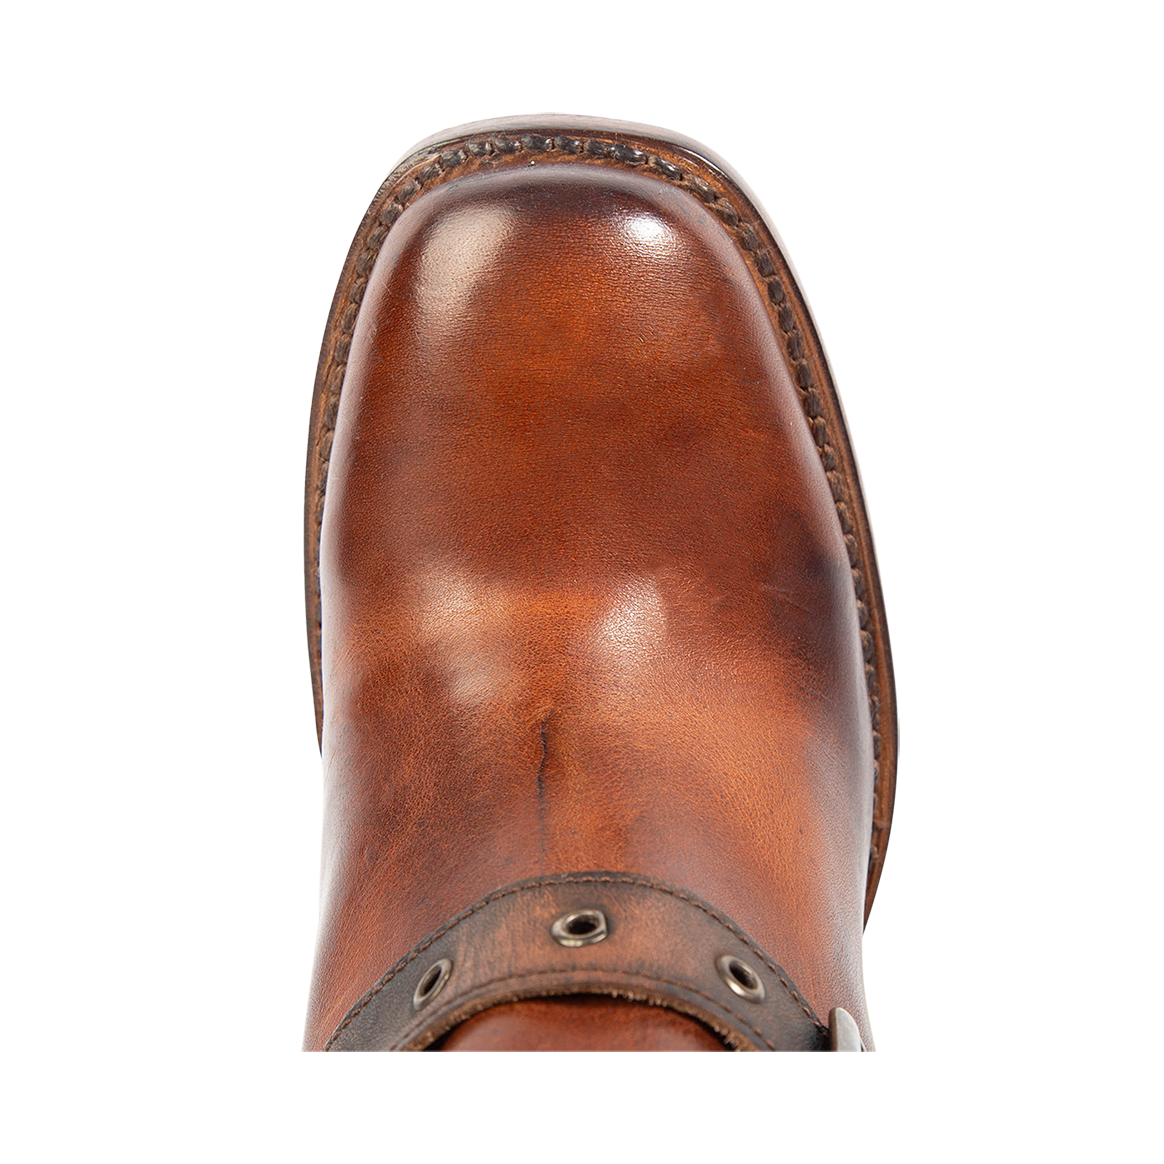 Top view showing square toe construction on FREEBIRD women's Derby cognac leather boot